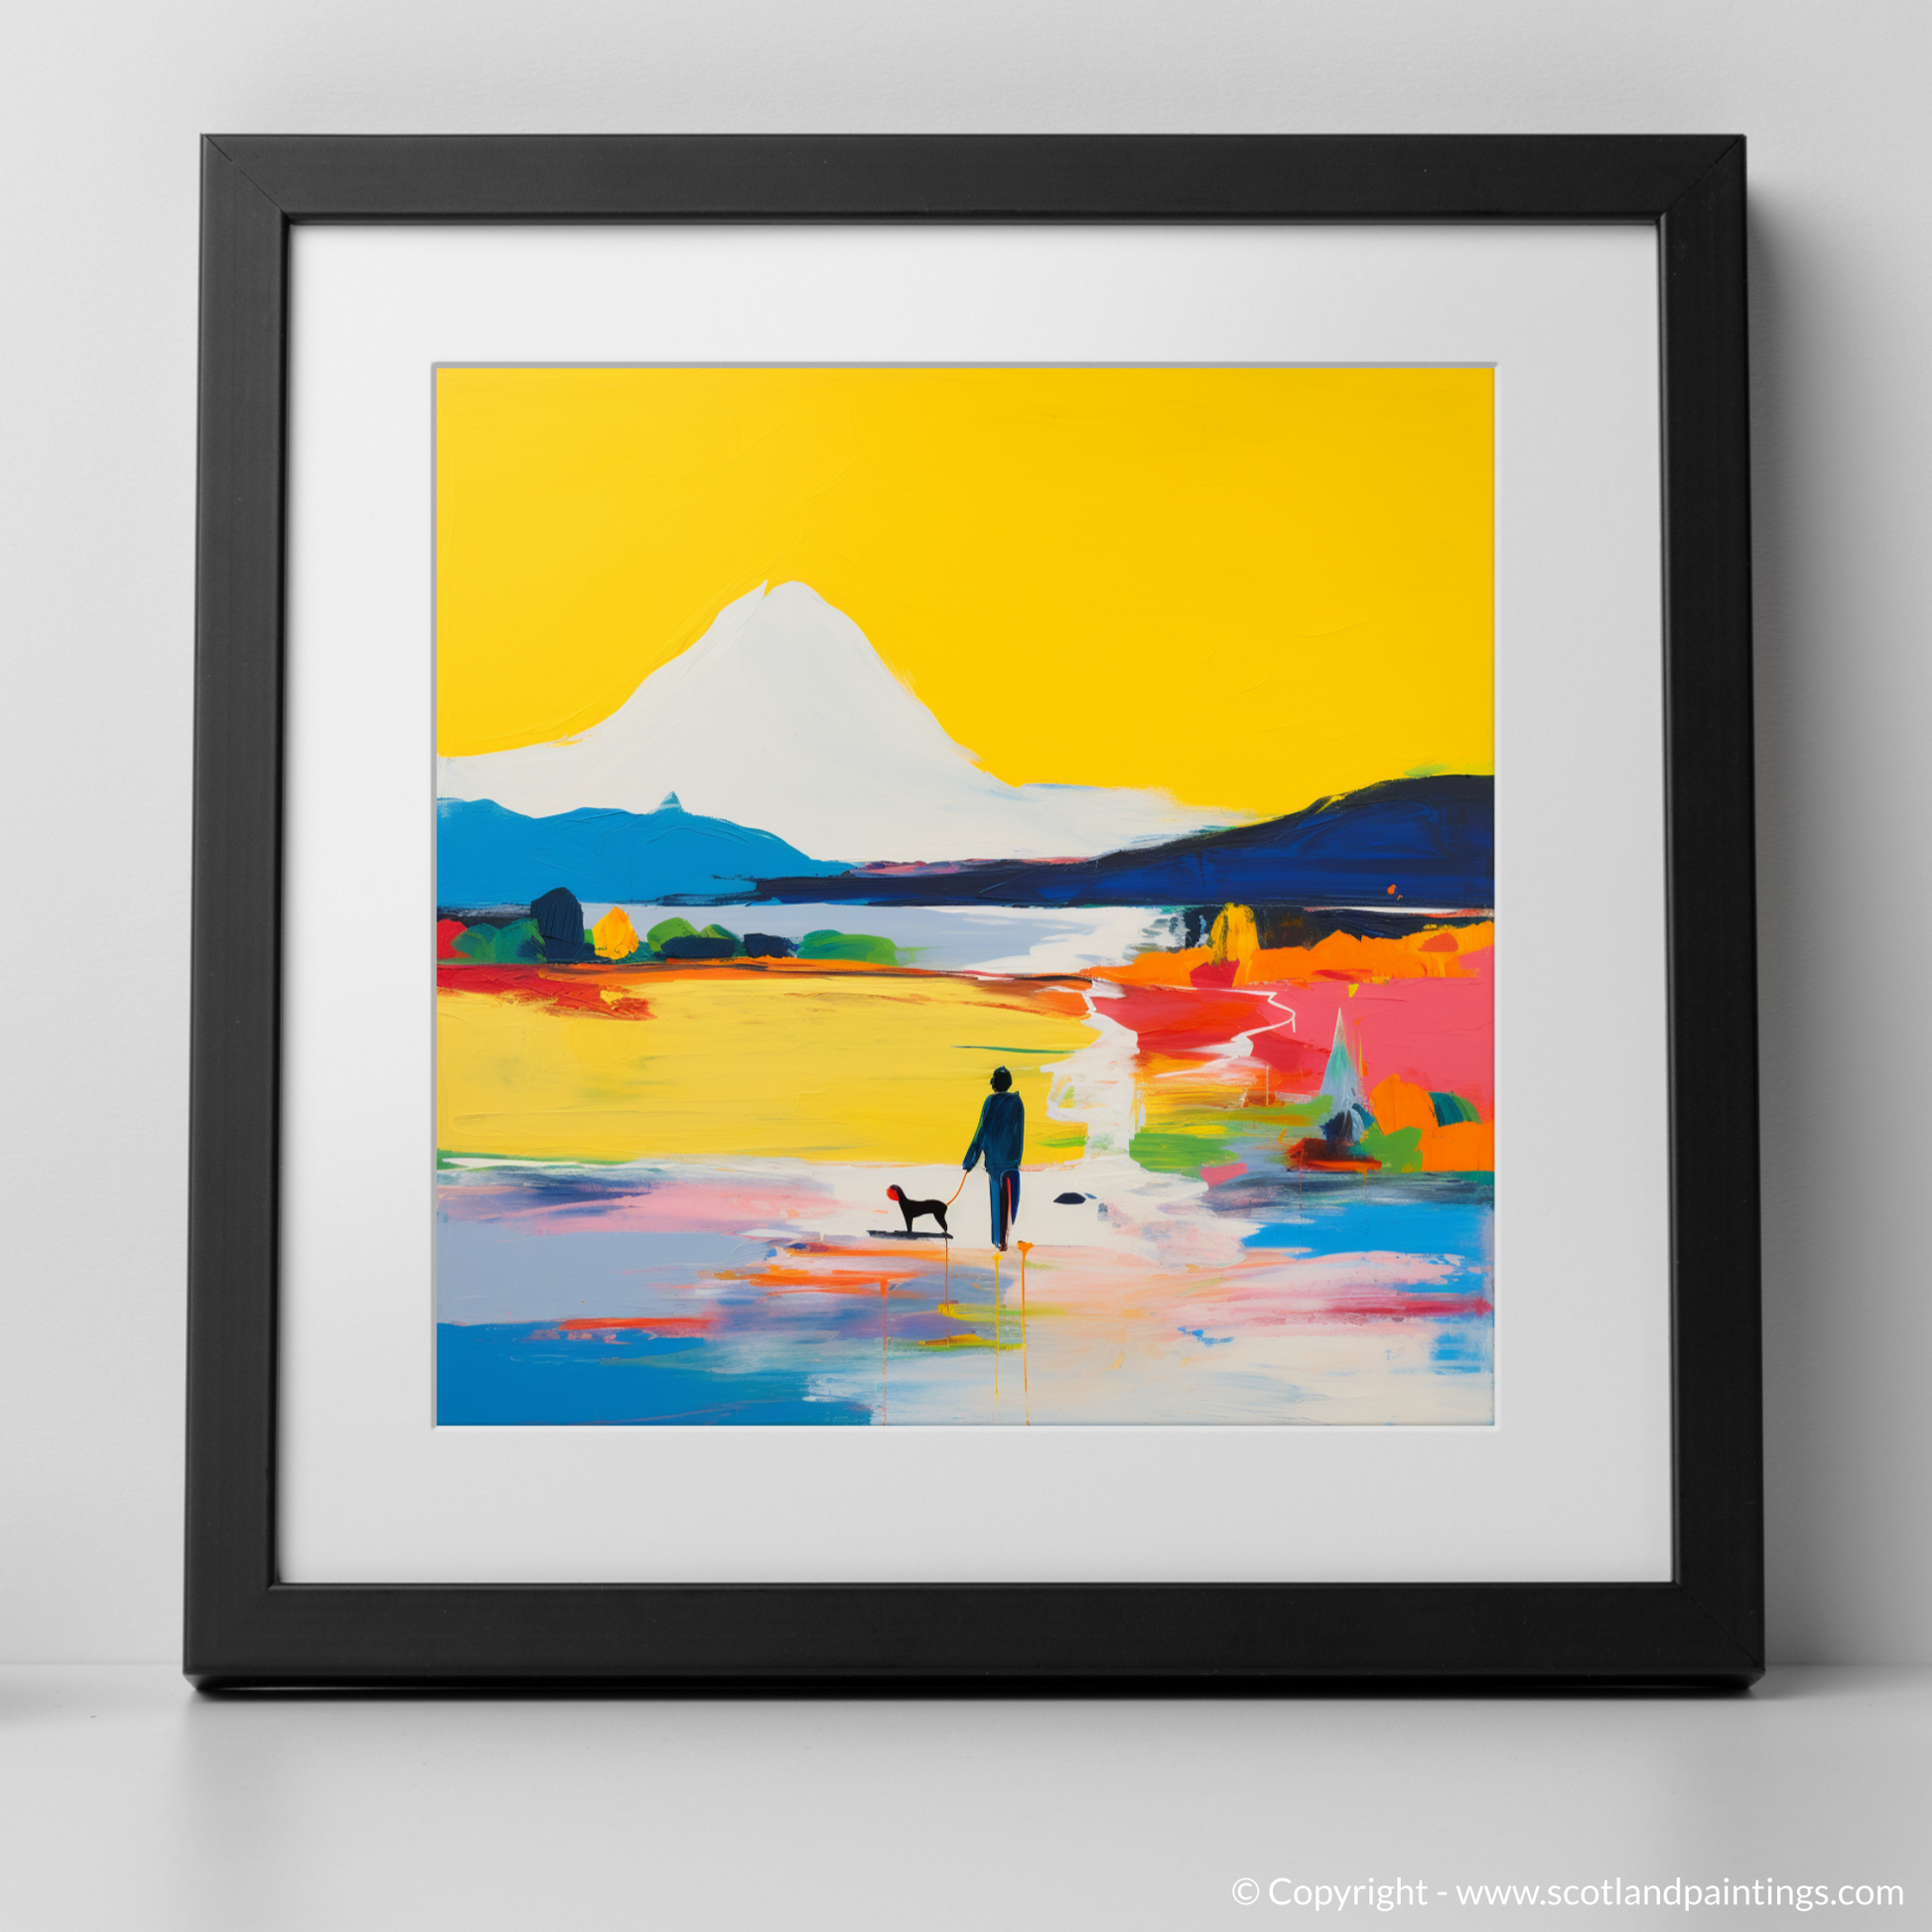 Art Print of A man walking dog at the side of Loch Lomond with a black frame